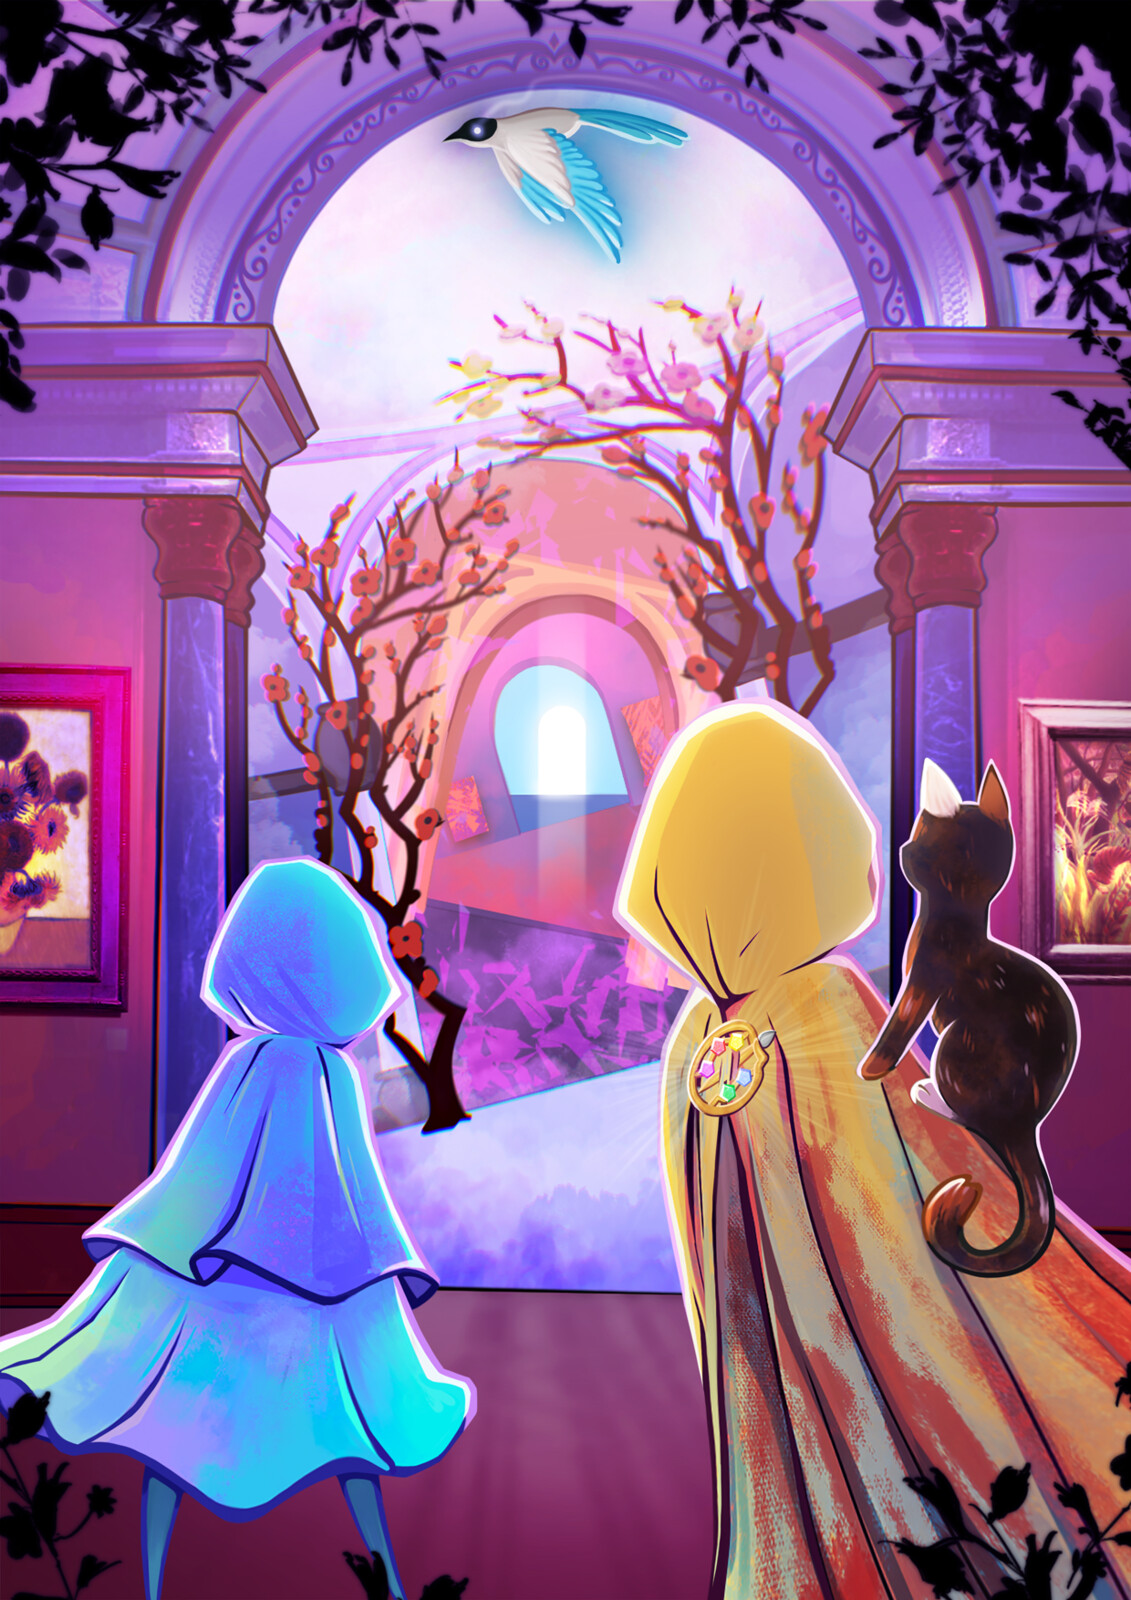 Final graphic for the Keeper of Painting poster and first in-game cut-scene. 
The Keeper of Paintings (right), the player (left) and Claws Monet (the cat) are looking through the distorted halls of the National Gallery's Keeper Dimension.